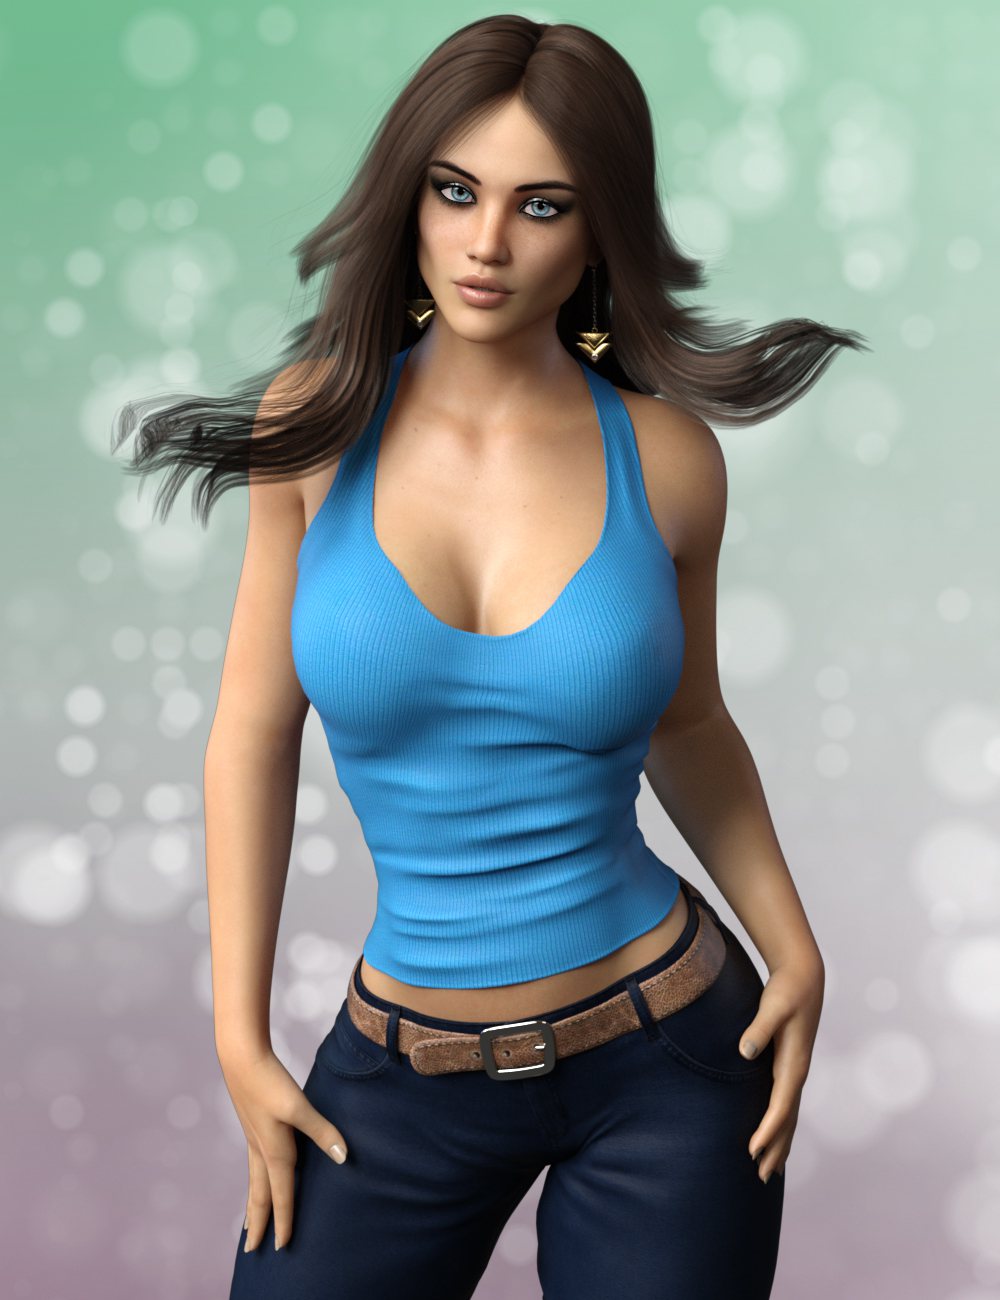 Drina for Victoria 7 and Genesis 3_DAZ3DDL